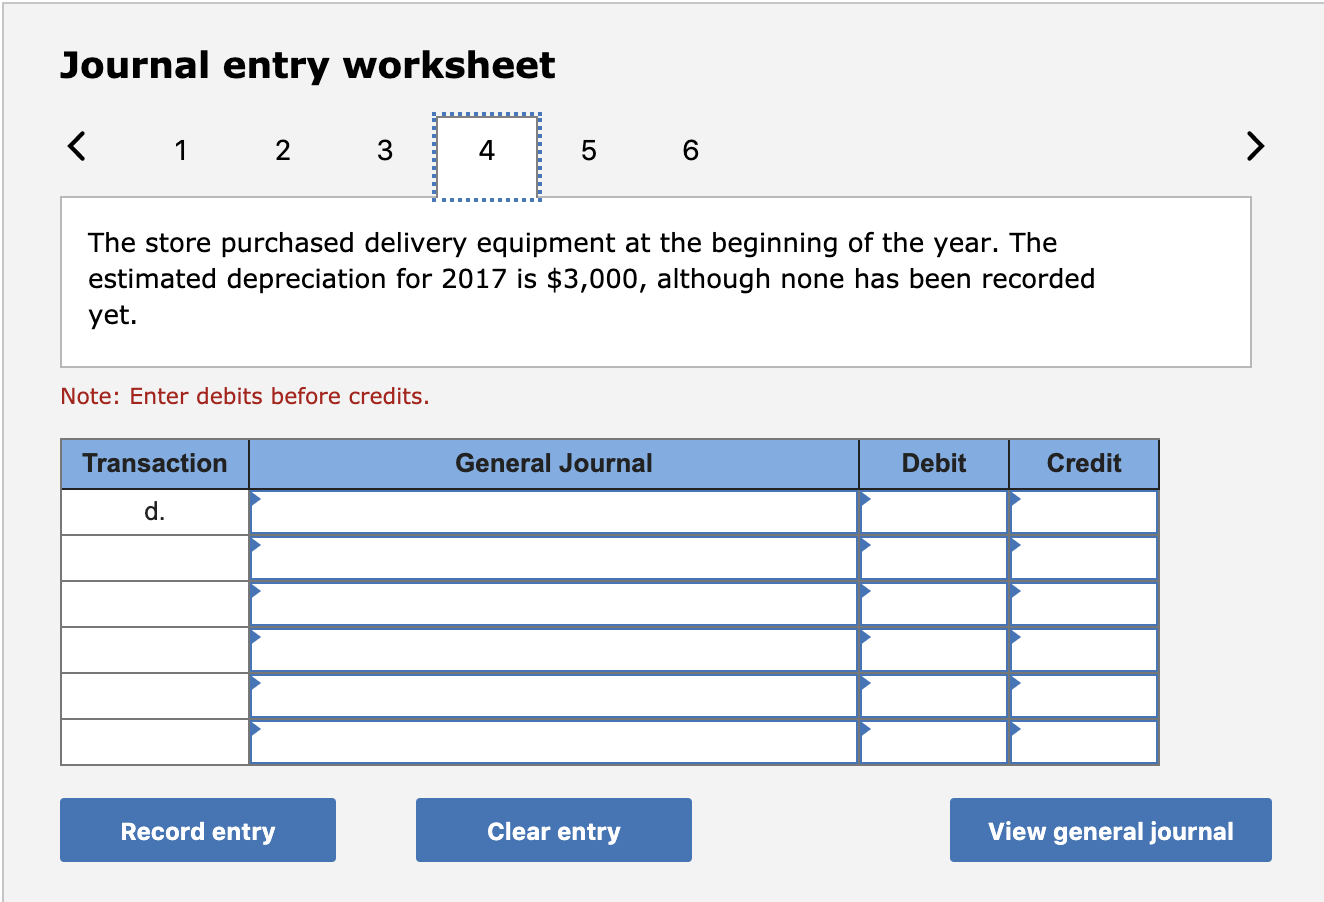 Journal entry worksheet the store purchased delivery equipment at the beginning of the year. the estimated depreciation for 2